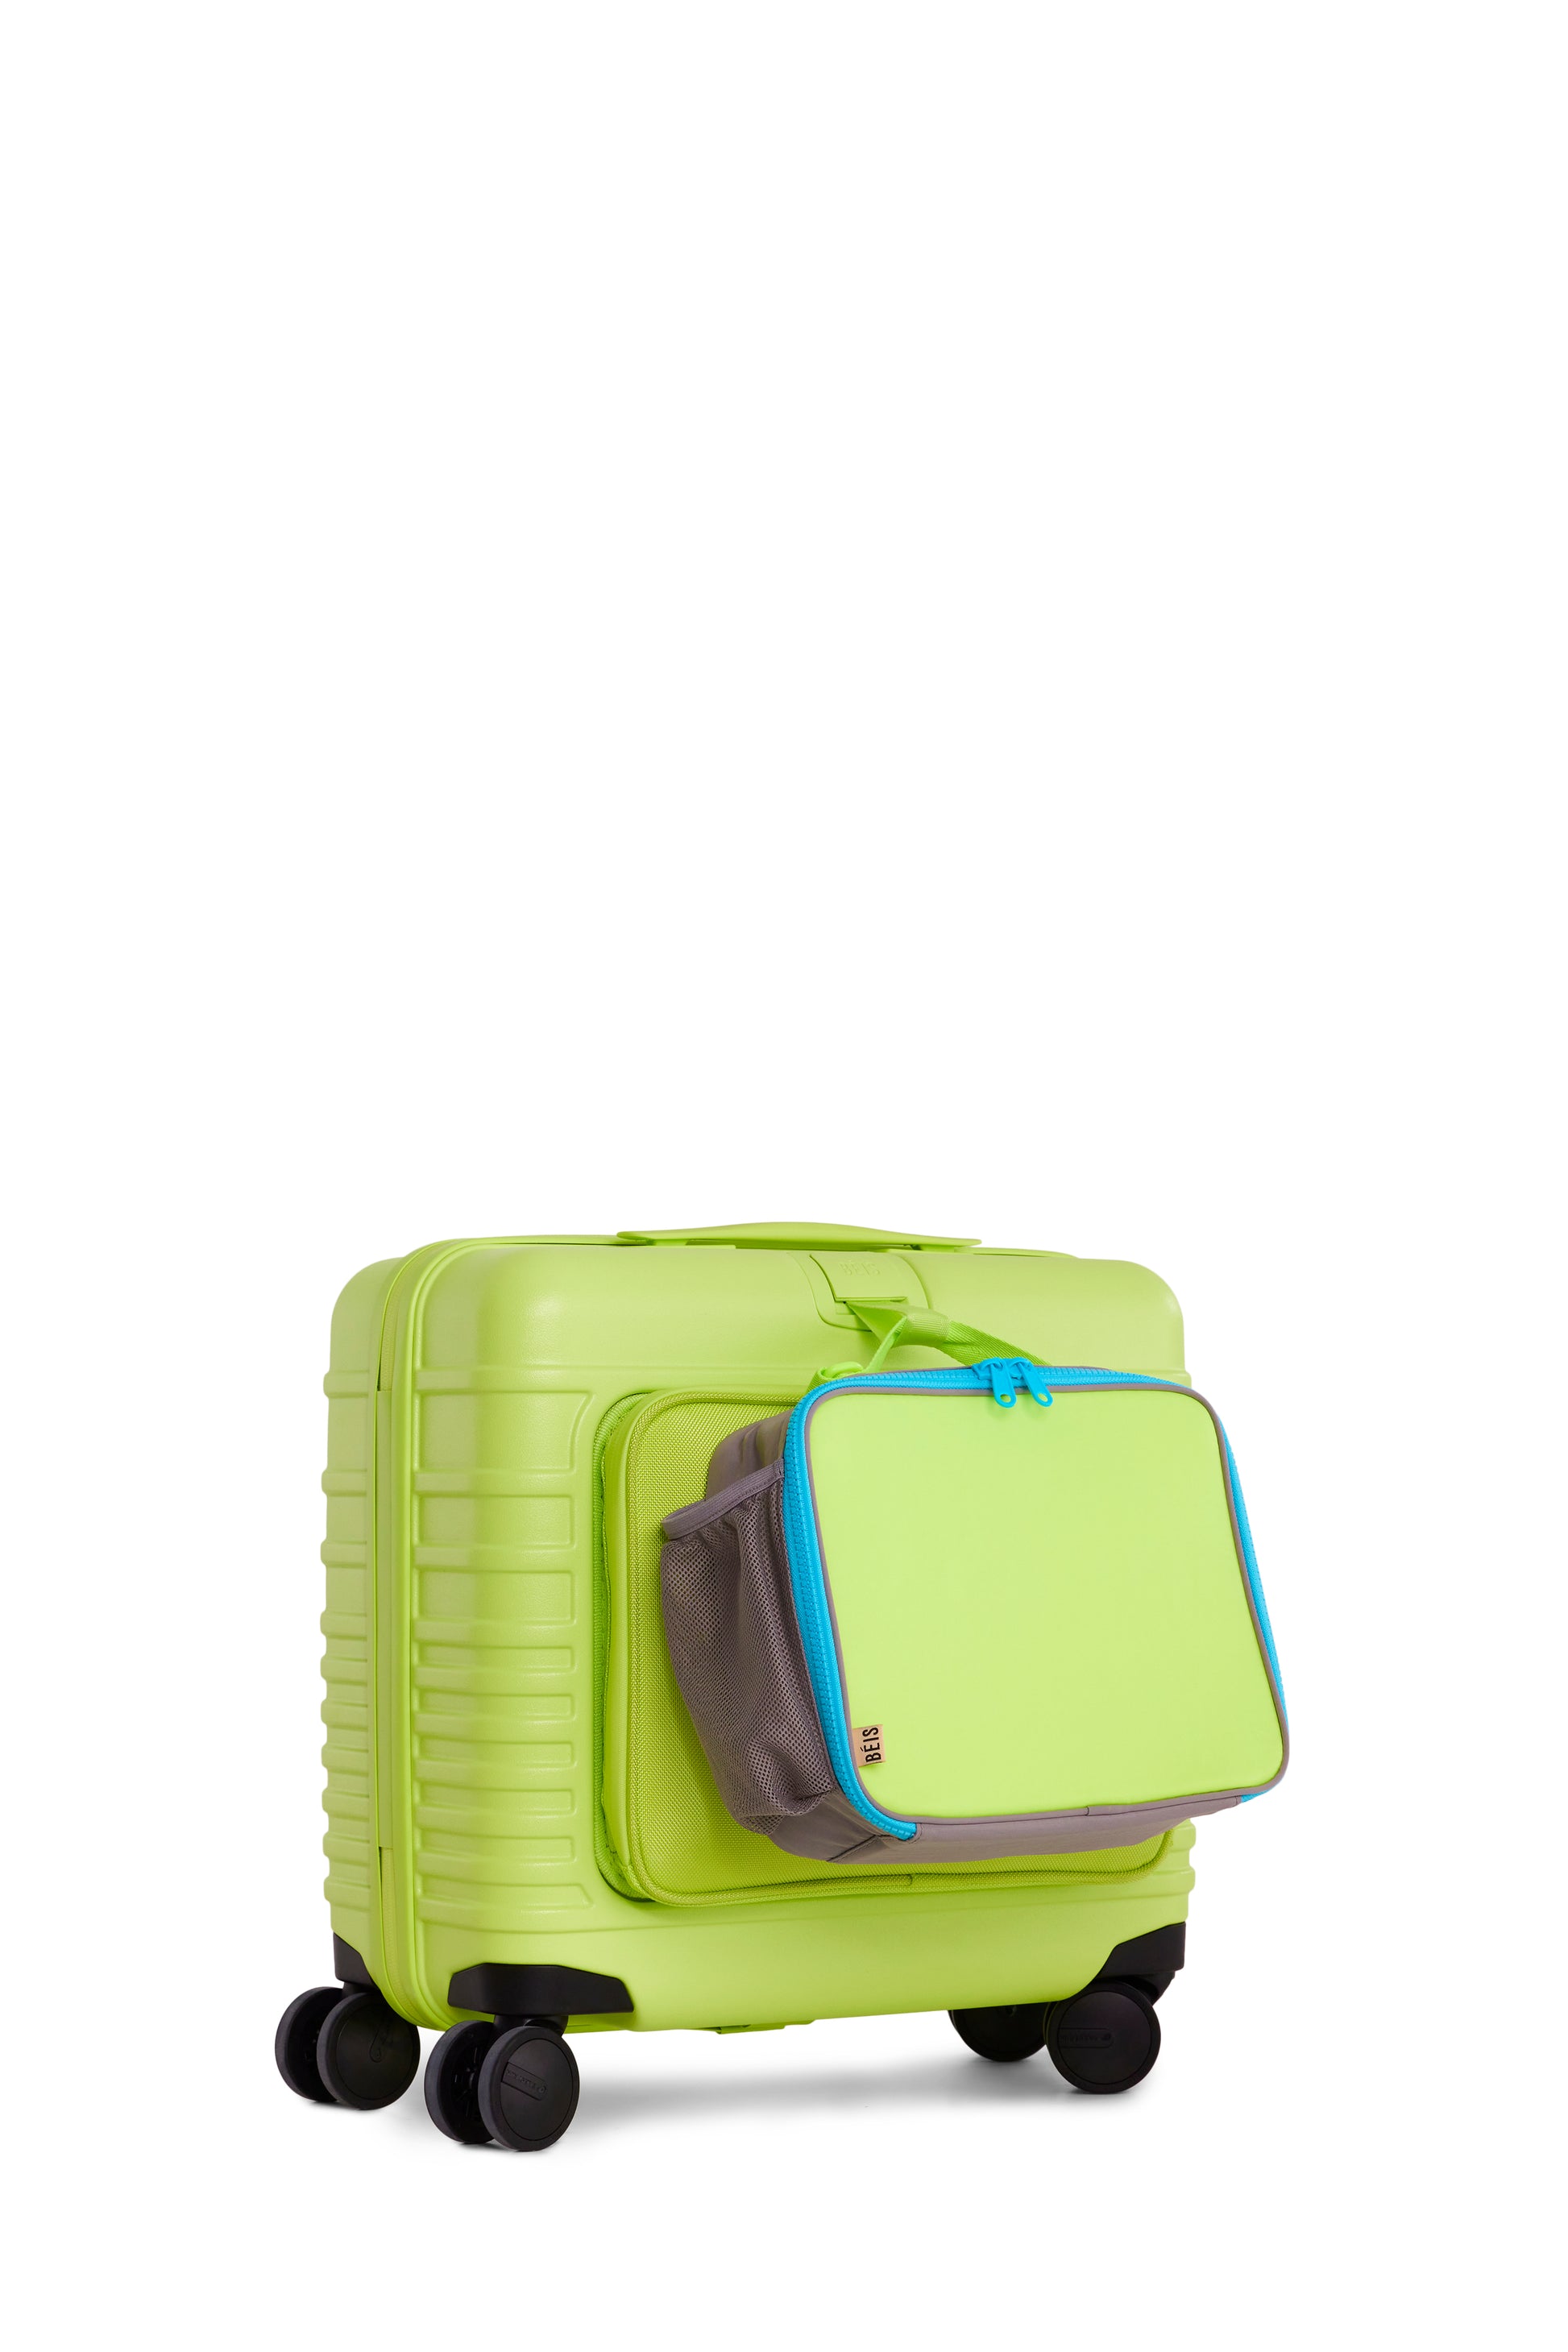 Béis 'The Kids Lunch Box' in Beige - Best Lunchboxes for Kids in Beige